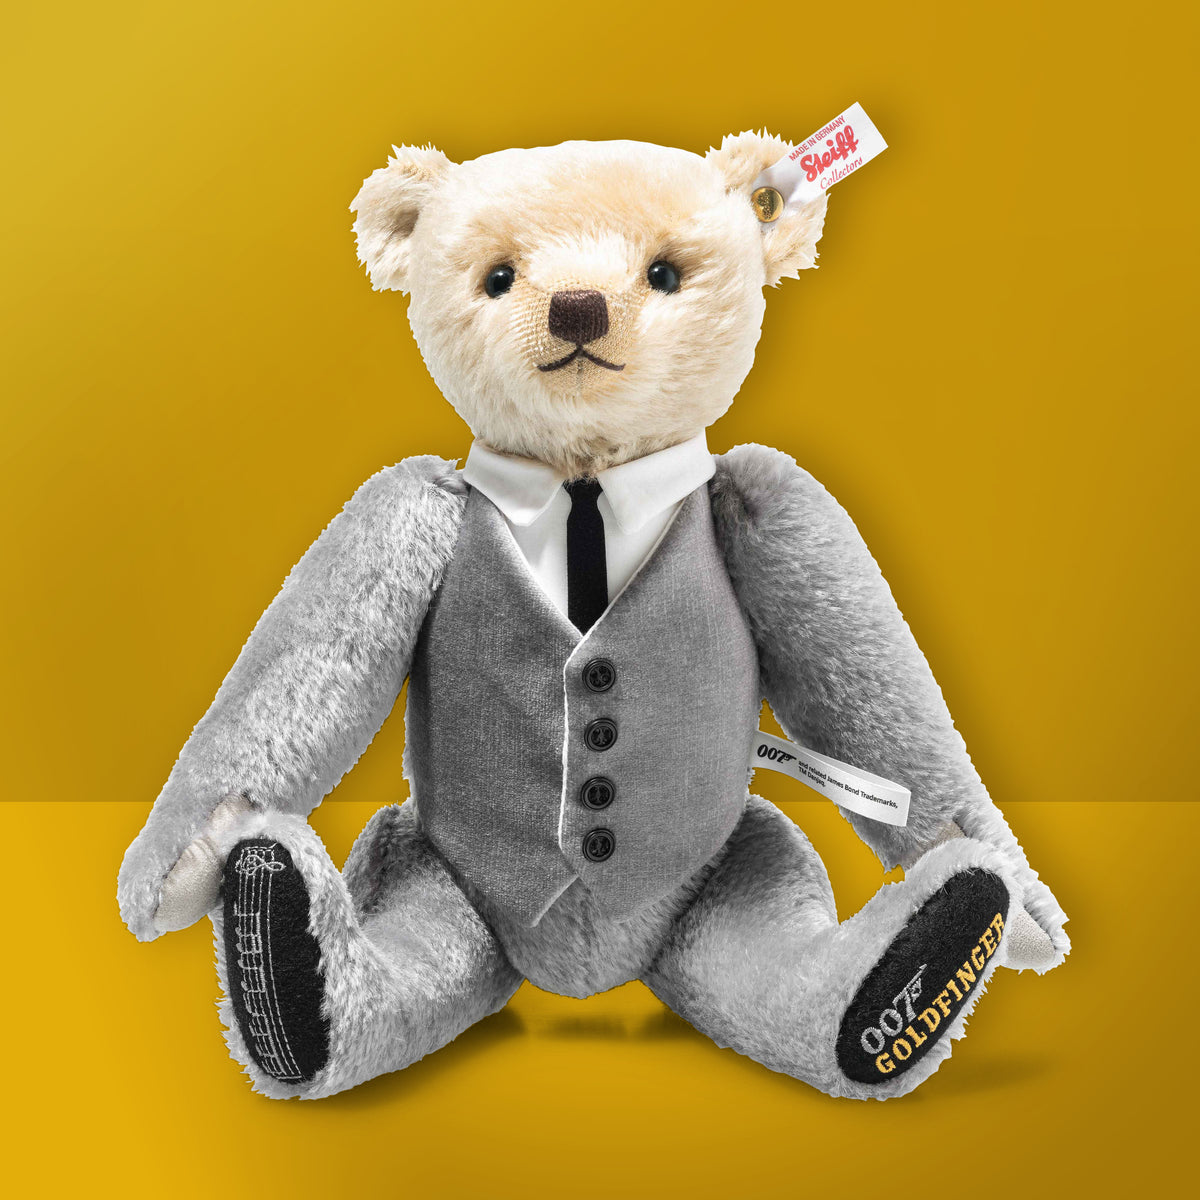 James Bond Musical Teddy Bear - Goldfinger Numbered Edition - By Steiff (Copy) 007Store